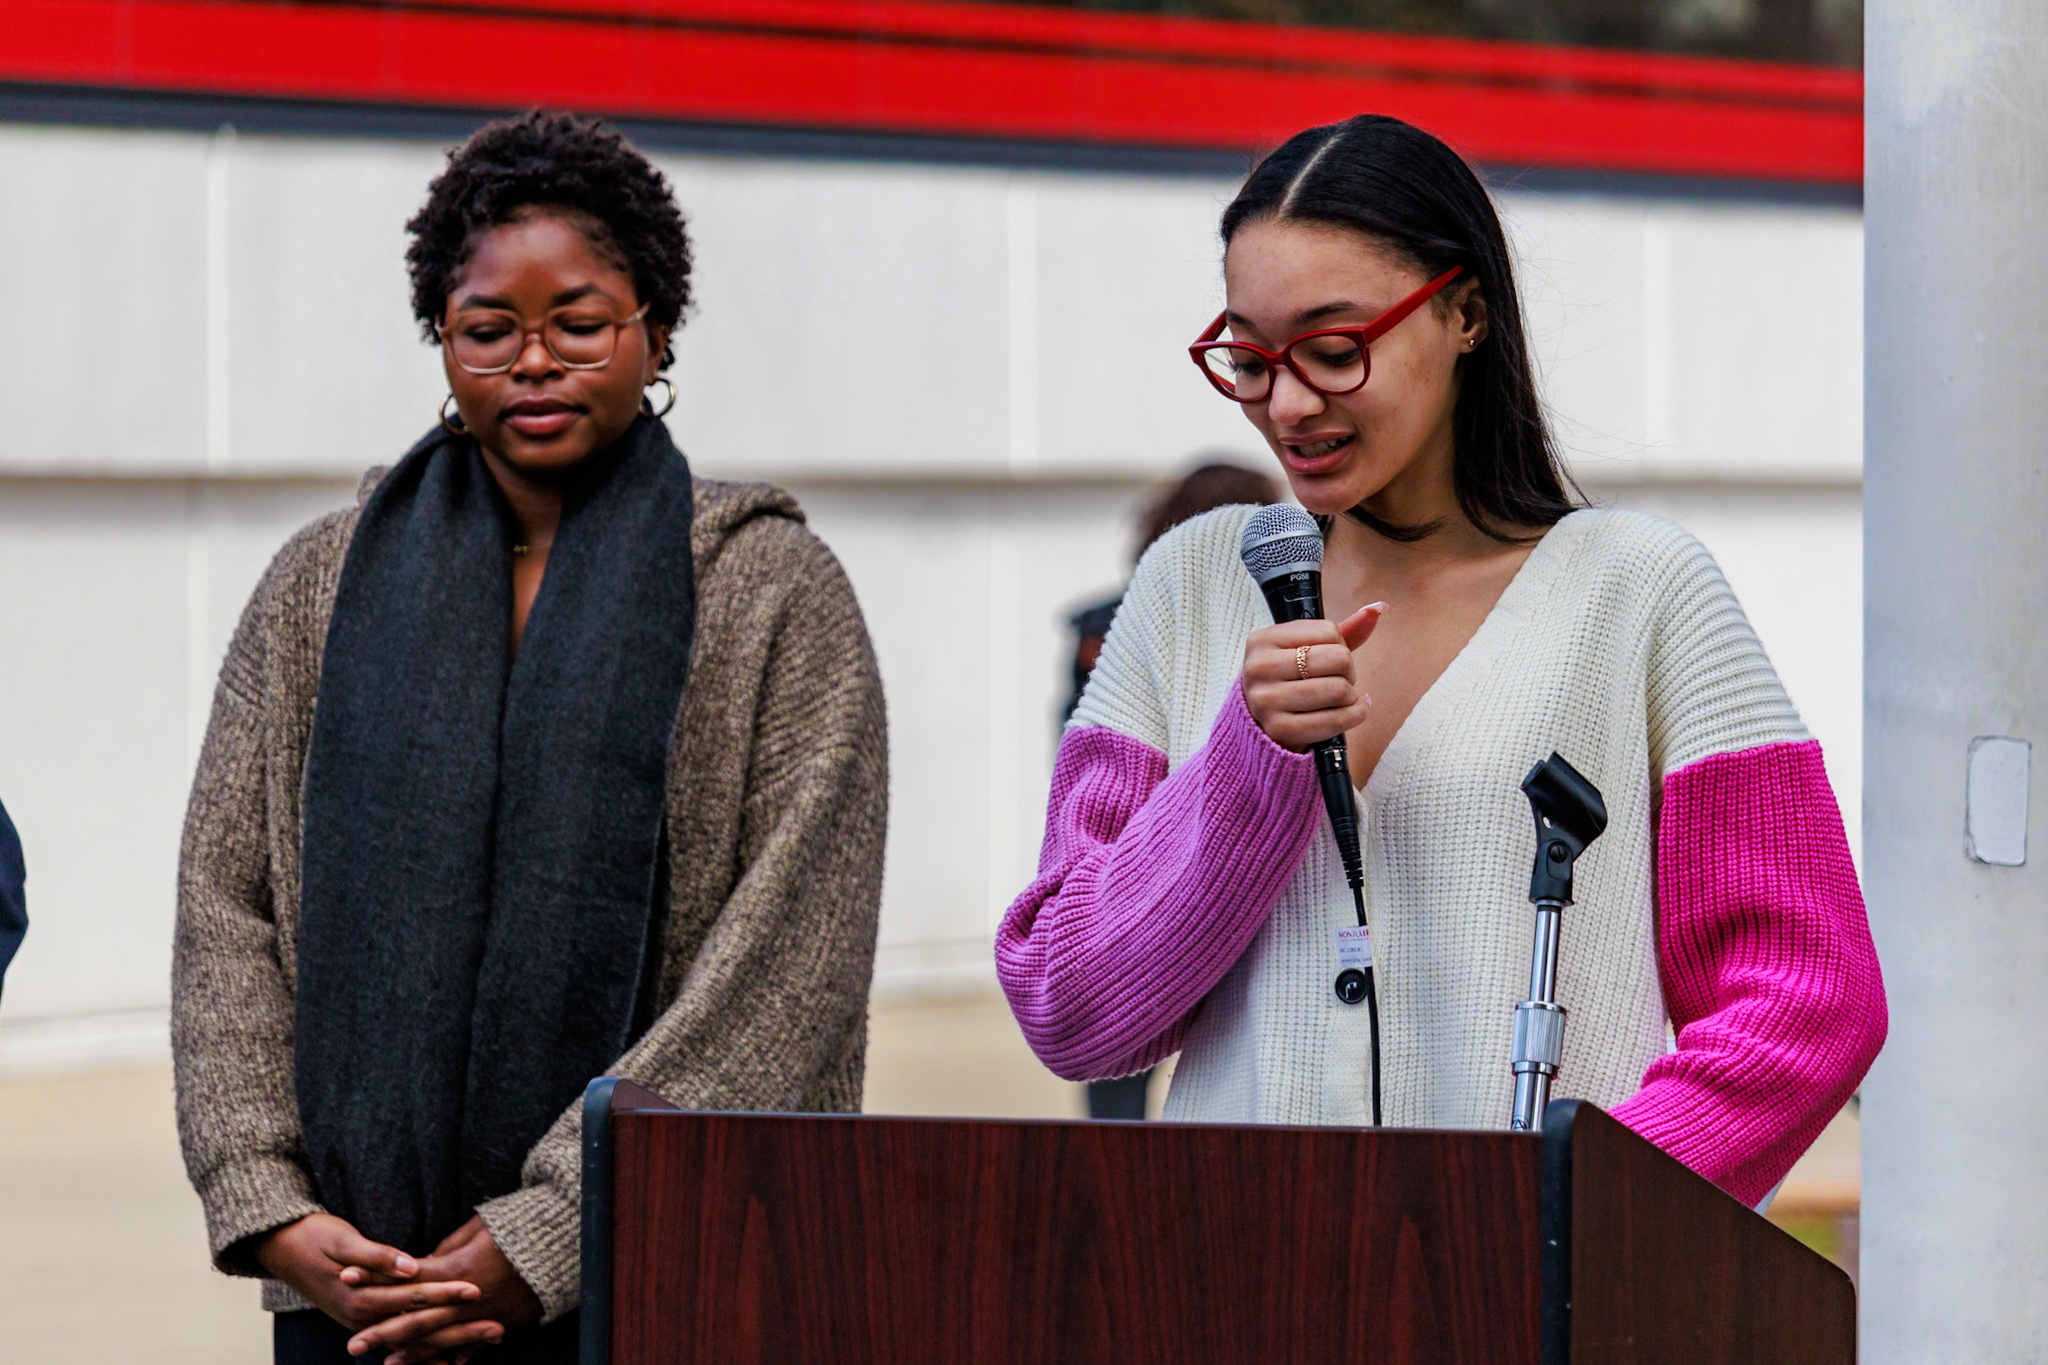 A student speaks speaks at the flag-raising event.
Sal DiMaggio | The Montclarion